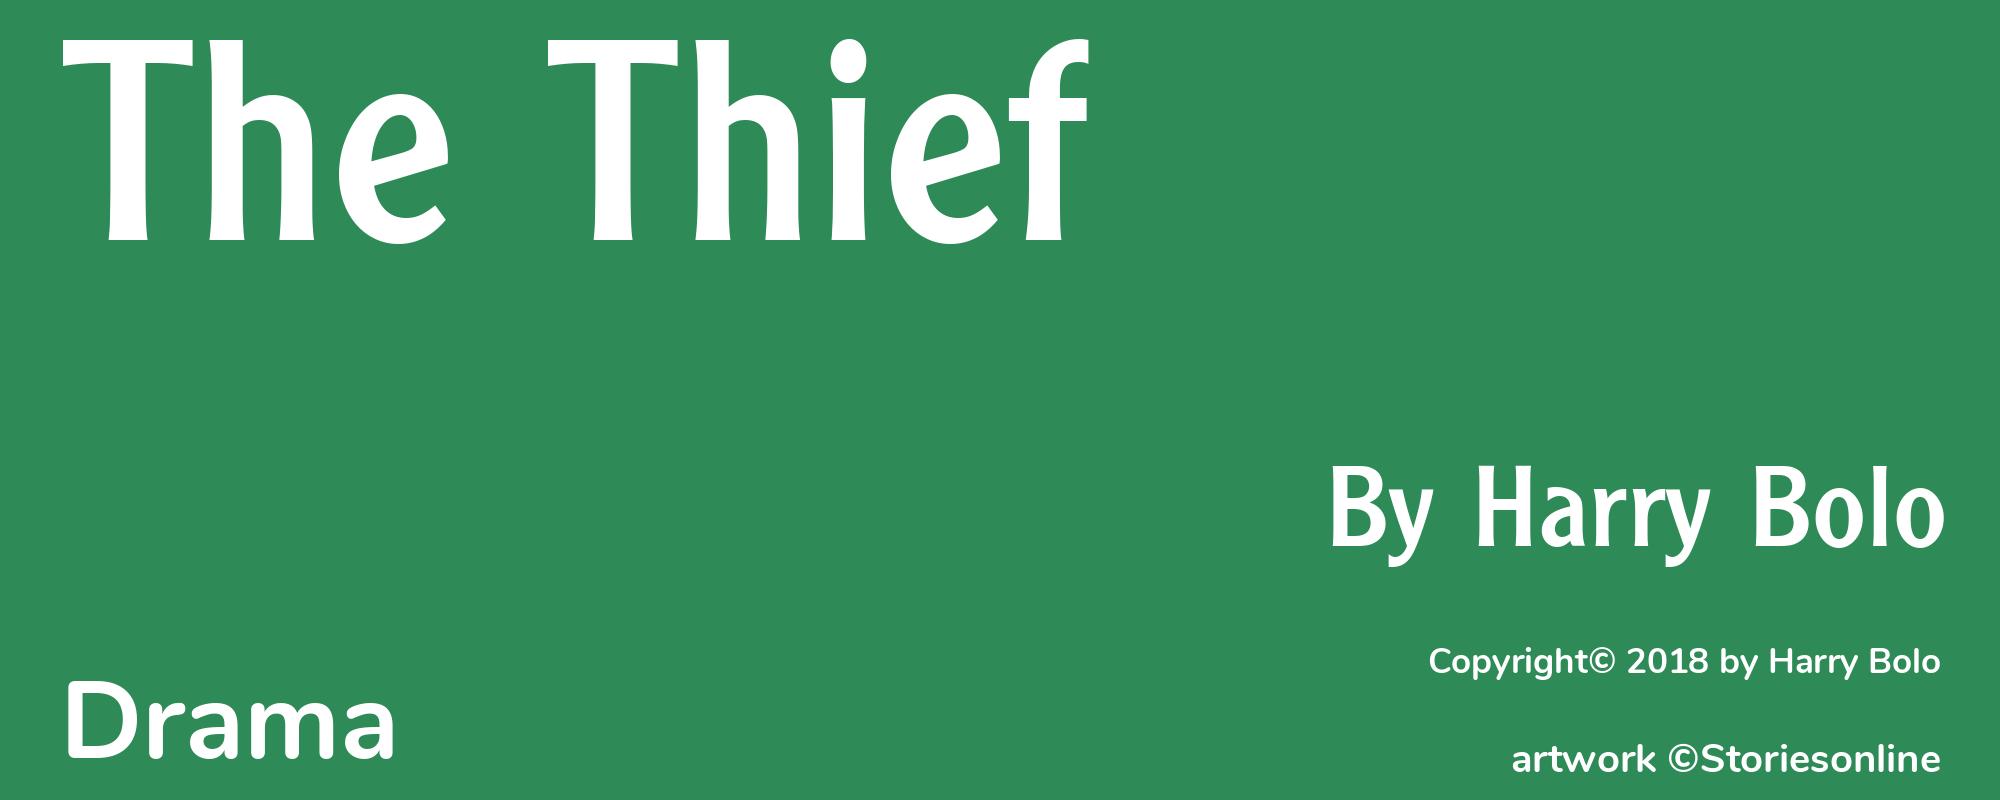 The Thief - Cover